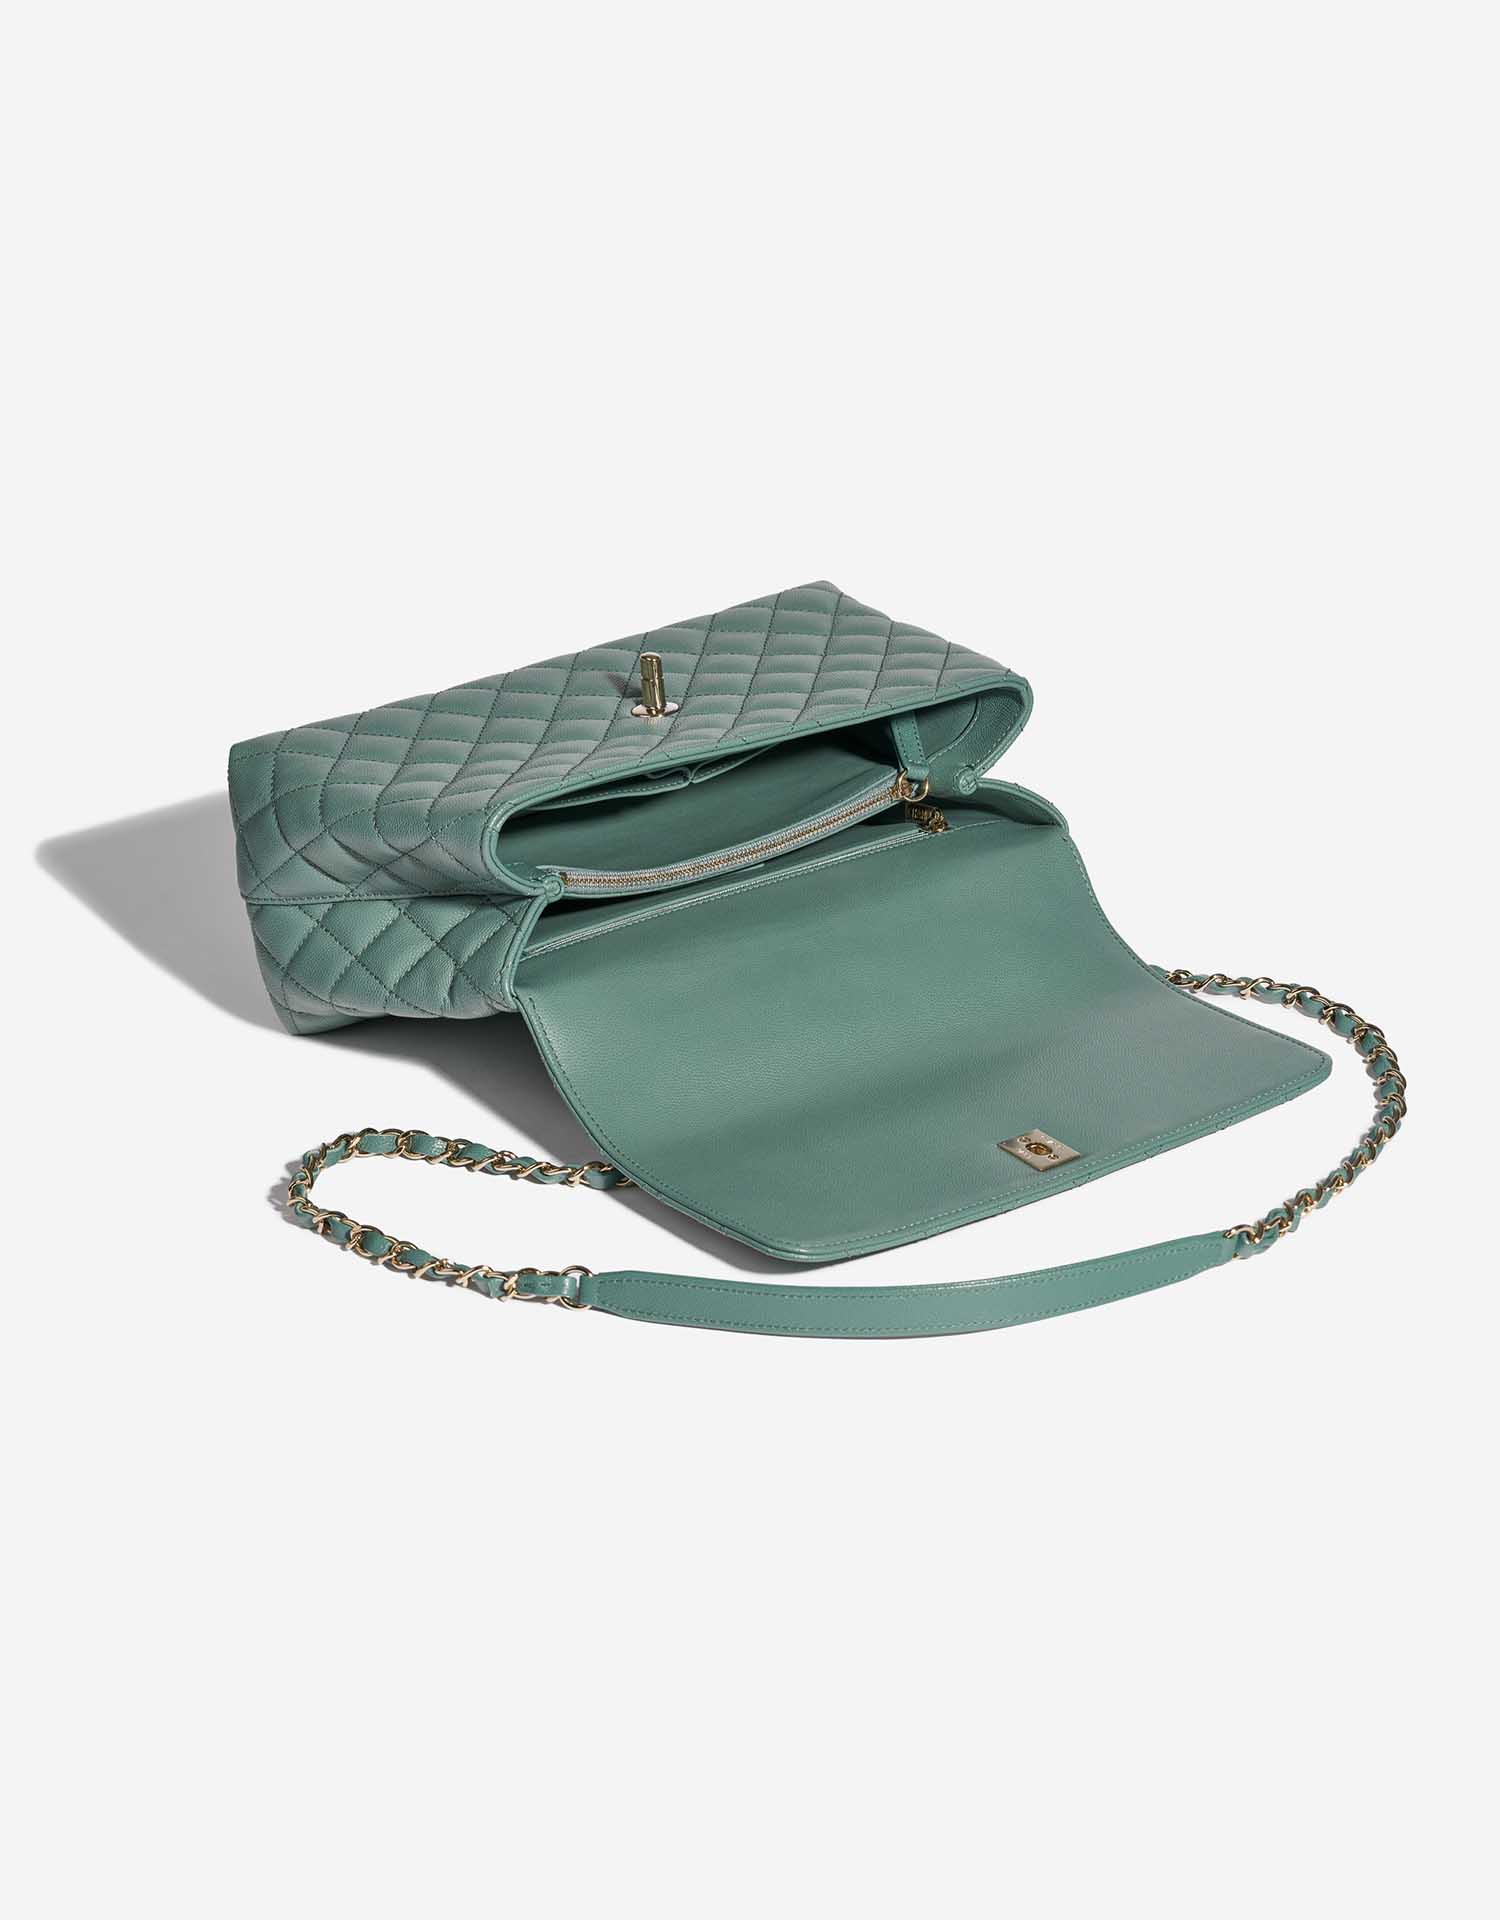 Pre-owned Chanel bag Timeless Handle Medium Caviar Mint Green Green Inside | Sell your designer bag on Saclab.com